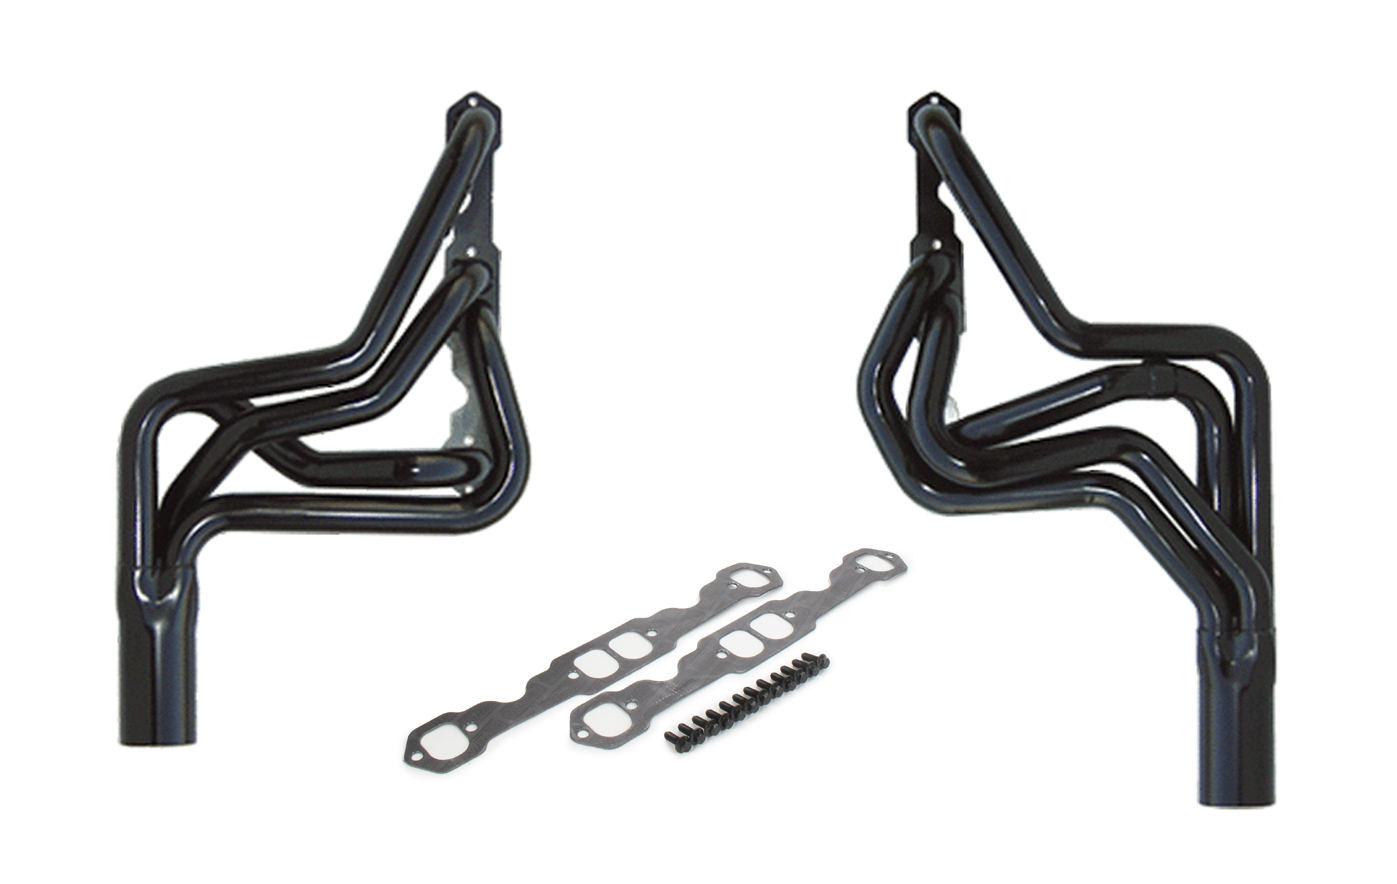 Schoenfeld Headers 1156LV - Headers, IMCA Modified, 1-3/4 to 1-7/8 in Primary, 3-1/2 in Collector, Steel, Black Paint, Small Block Chevy, Kit